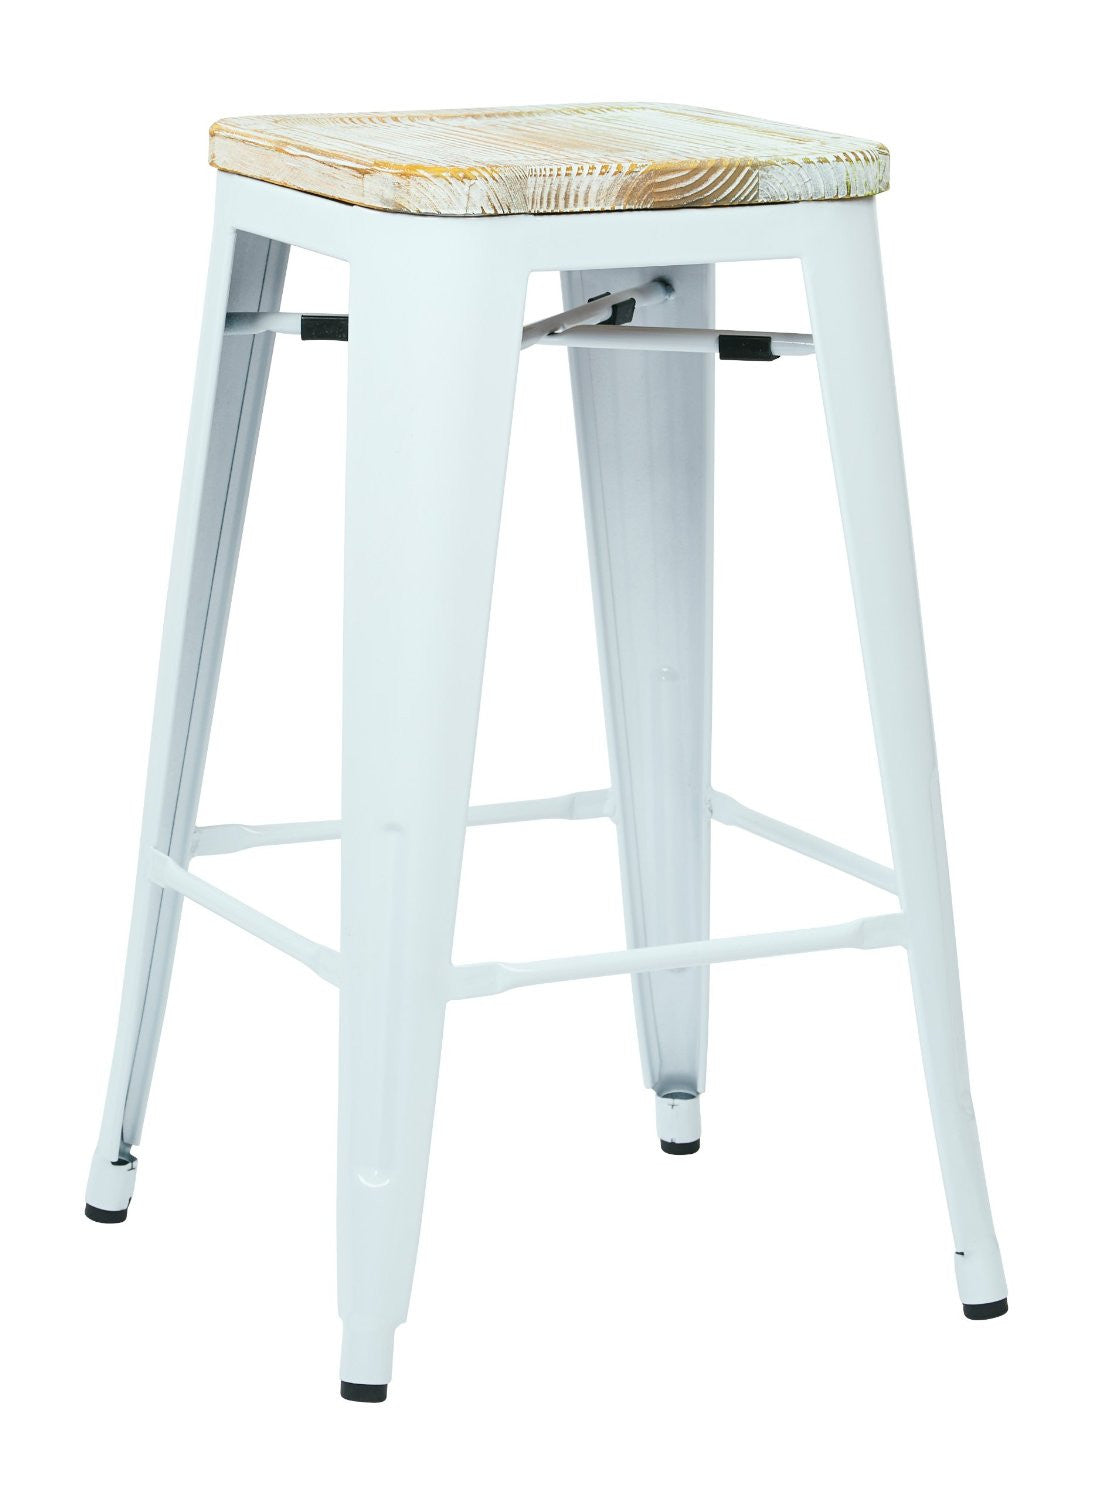 Osp Designs Brw312611a2-c308 Bristow 26" Antique Metal Barstool With Vintage Wood Seat, White Finish Frame & Ash Yellow Stone Finish Seat, 2 Pack